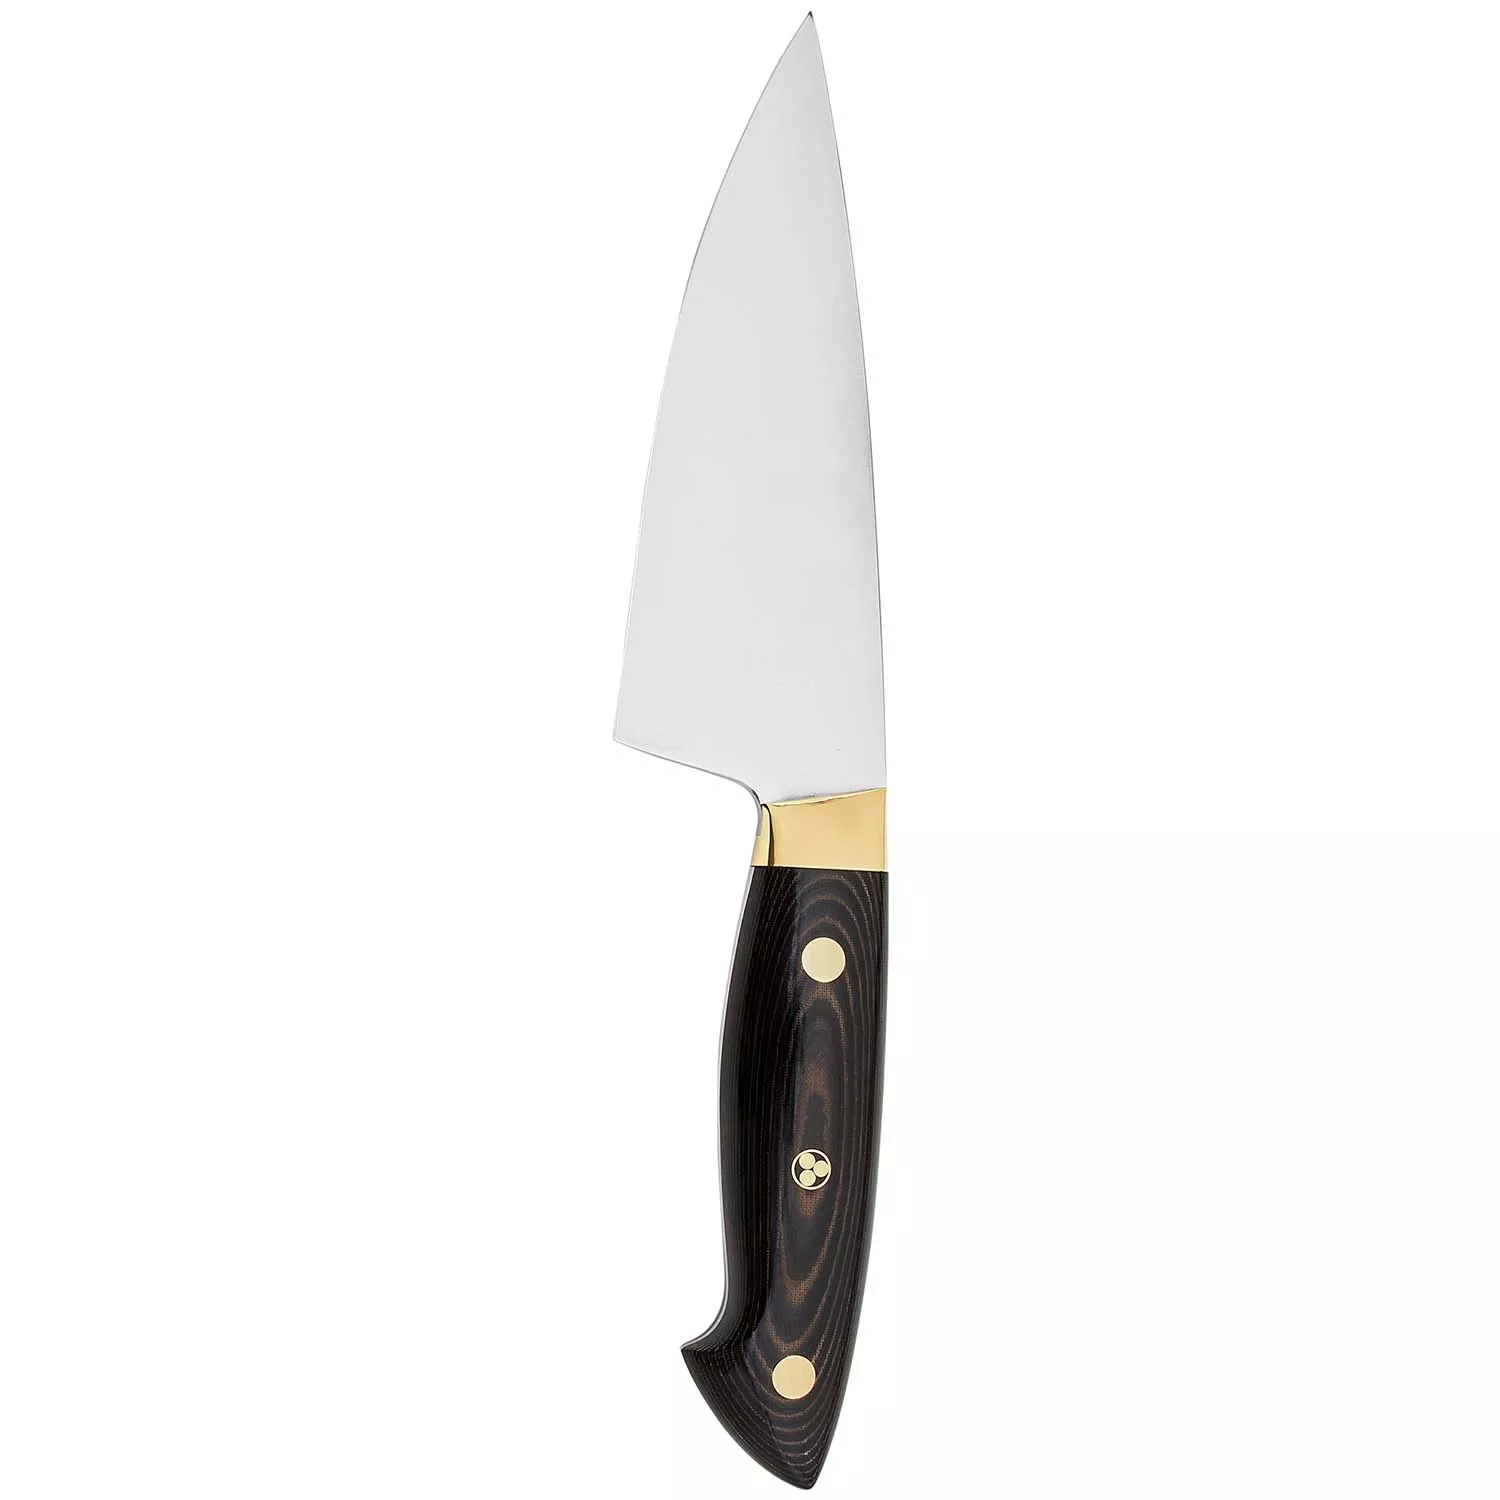 KRAMER by ZWILLING EUROLINE Carbon Collection 2.0 6-inch Chef's Knife